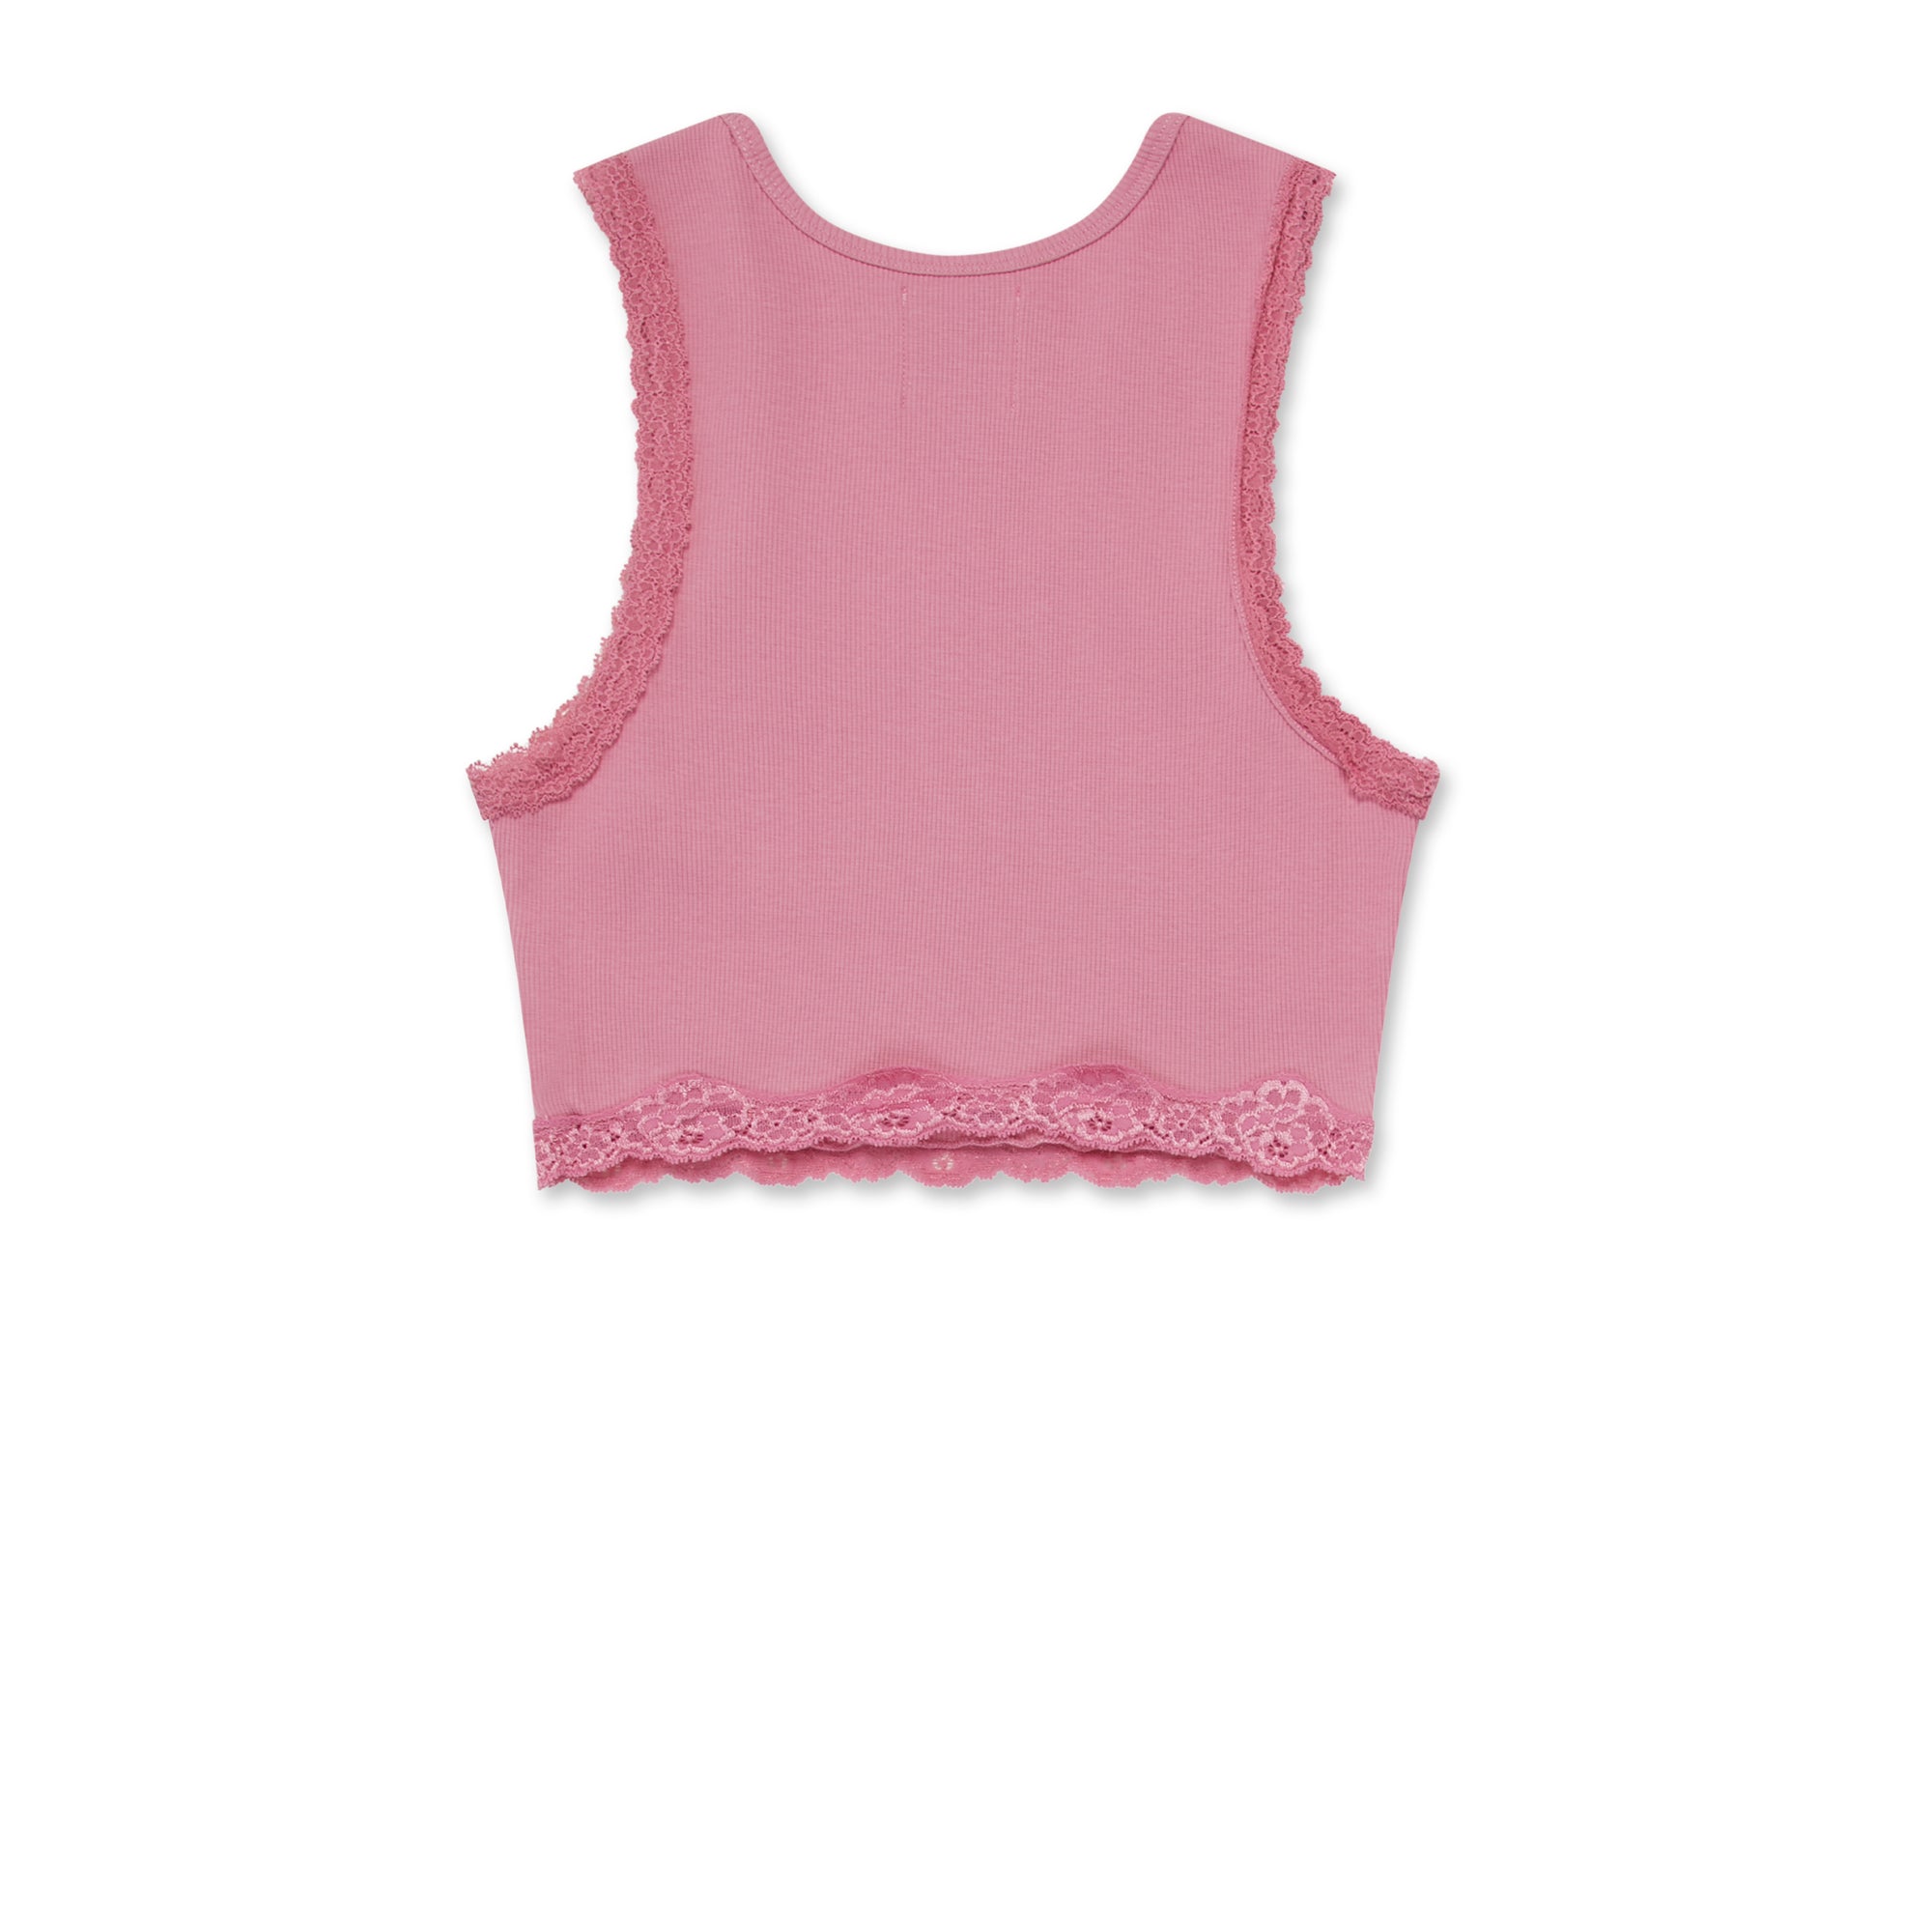 Blumarine by Marc Jacobs - Women’s Crop Graphic Lace Tank - (Pink) view 2